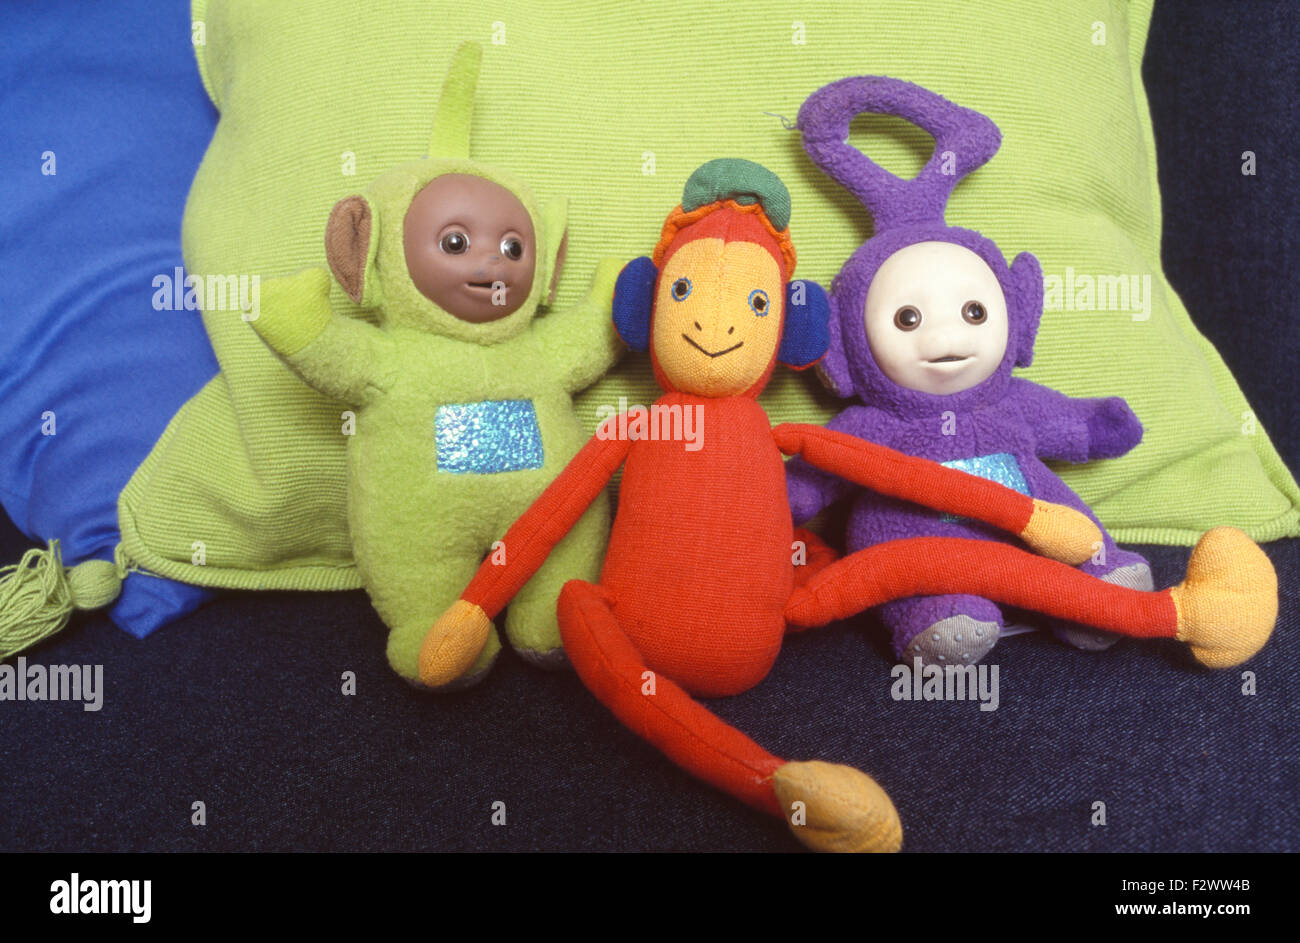 Close-up of a set of Teletubbies dolls Stock Photo